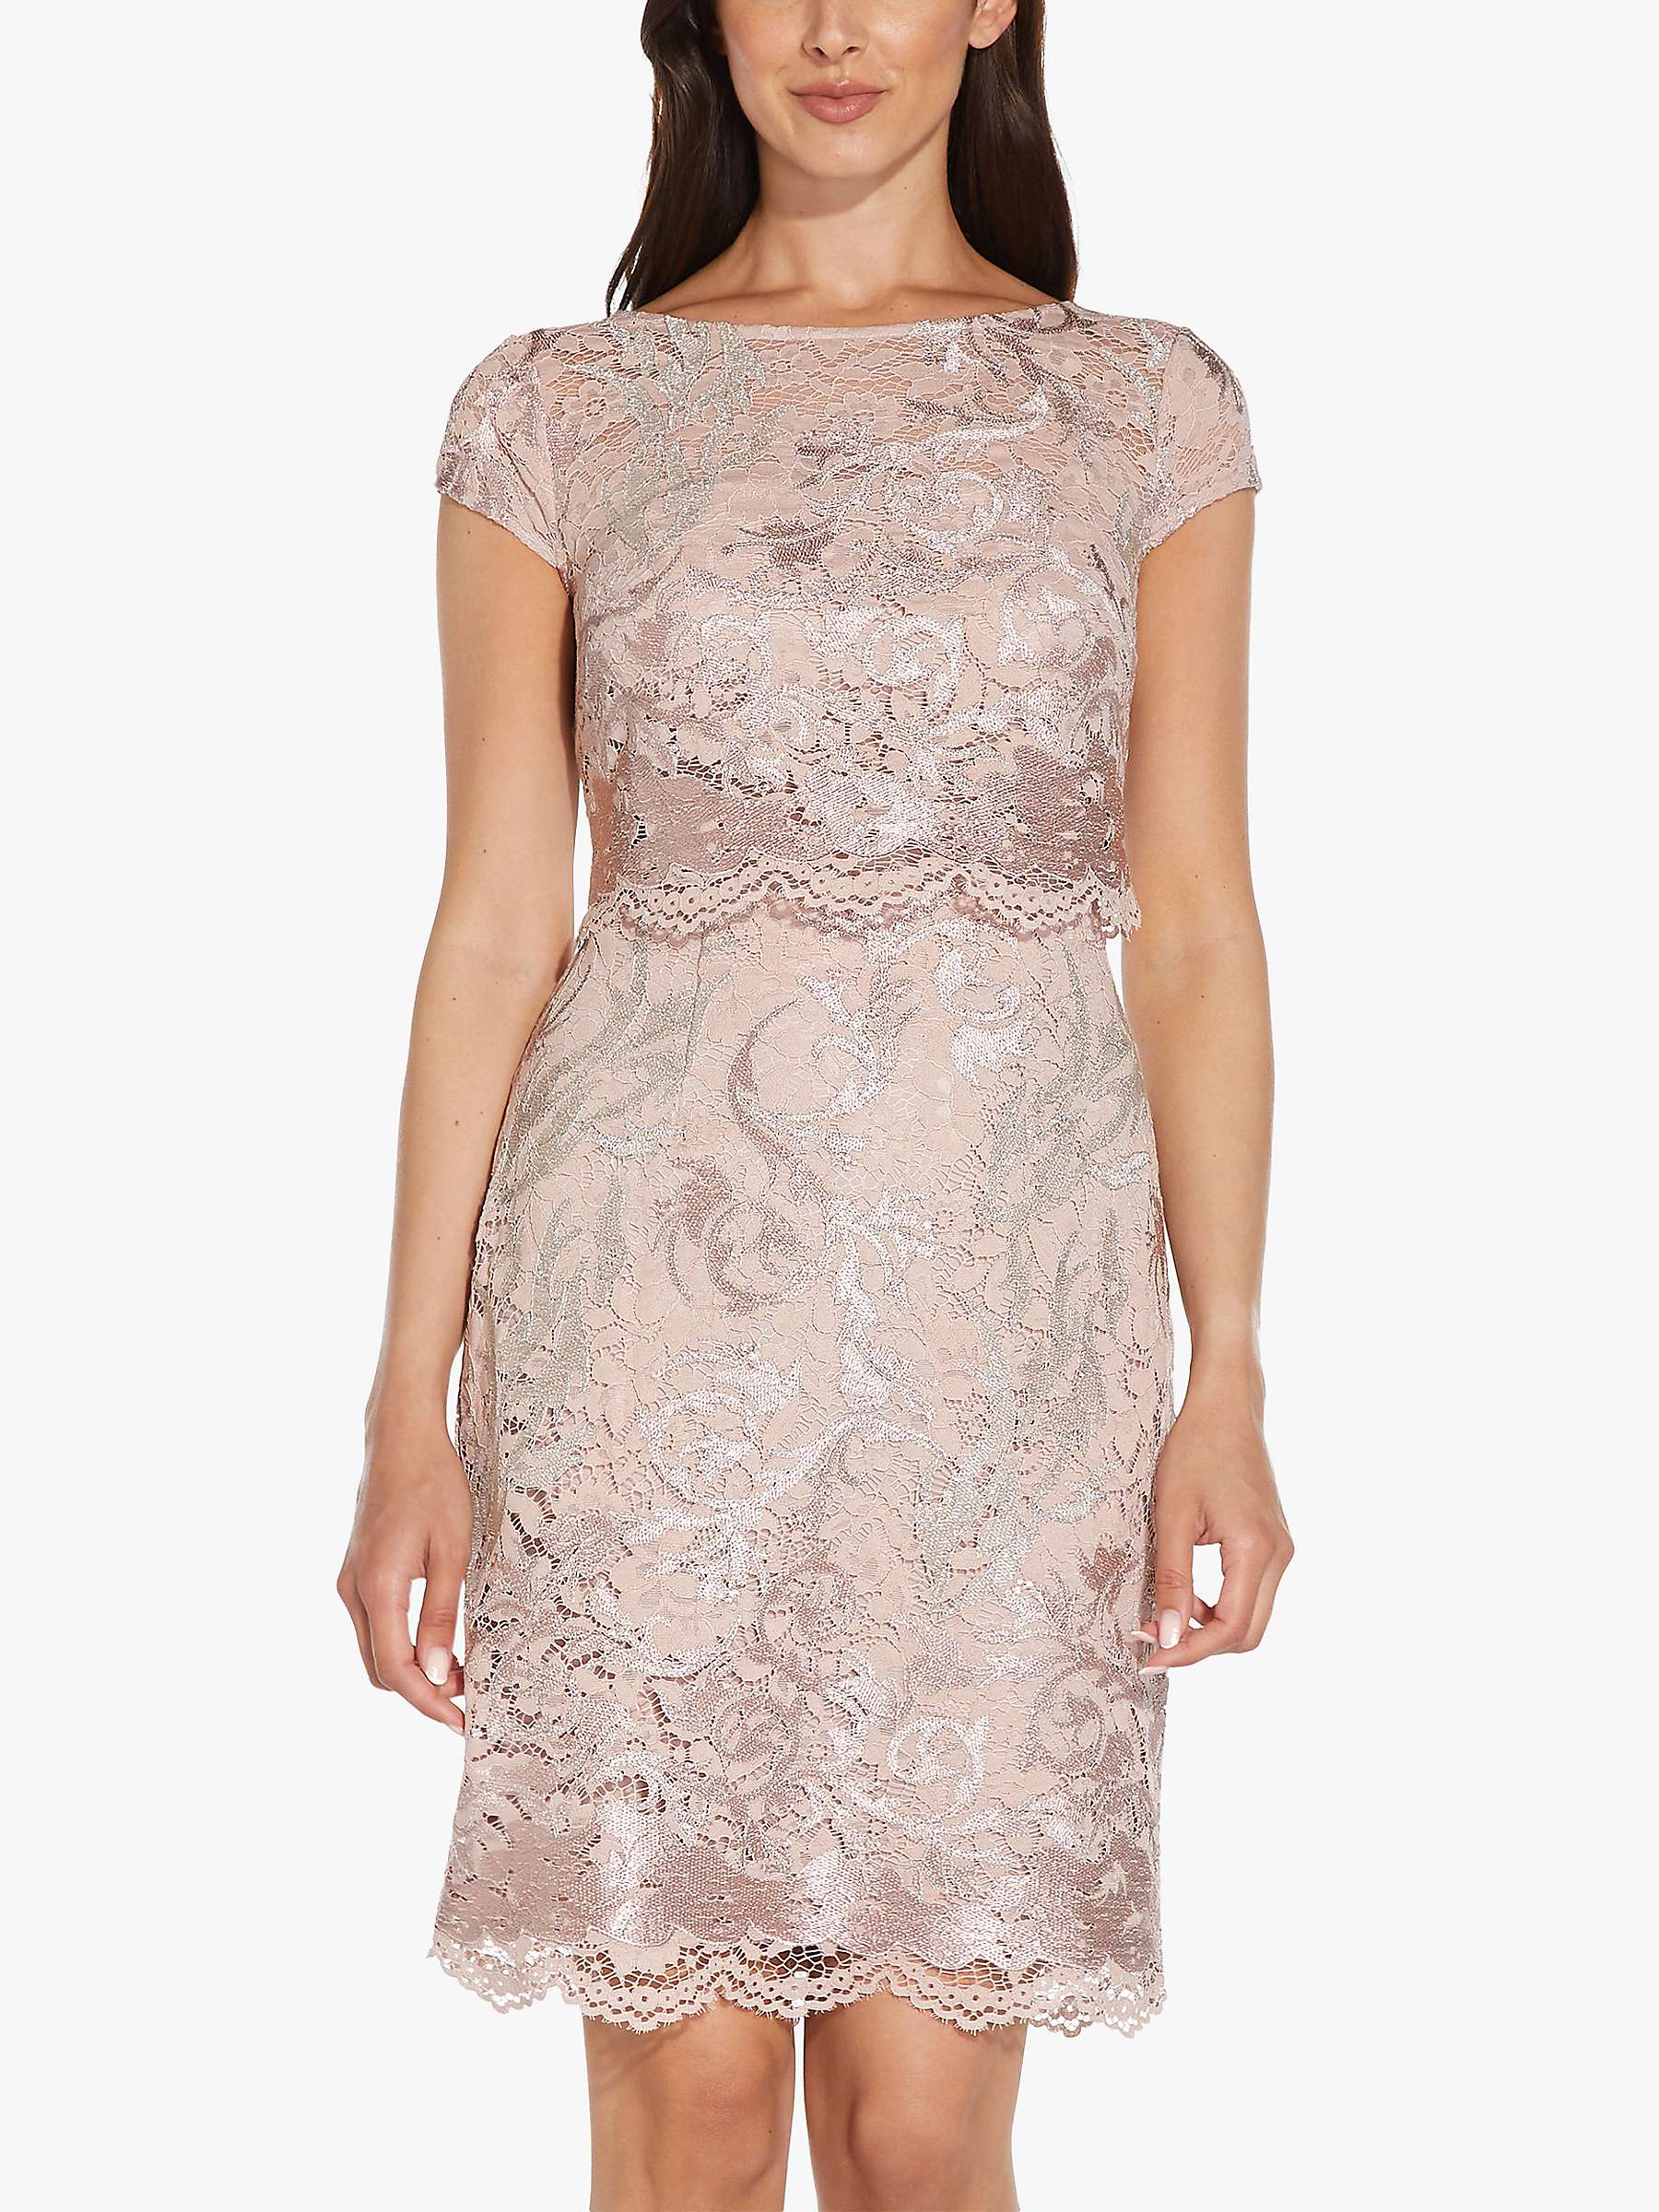 Buy Adrianna Papell Embroidered Lace Dress, Dusty Rose Online at johnlewis.com